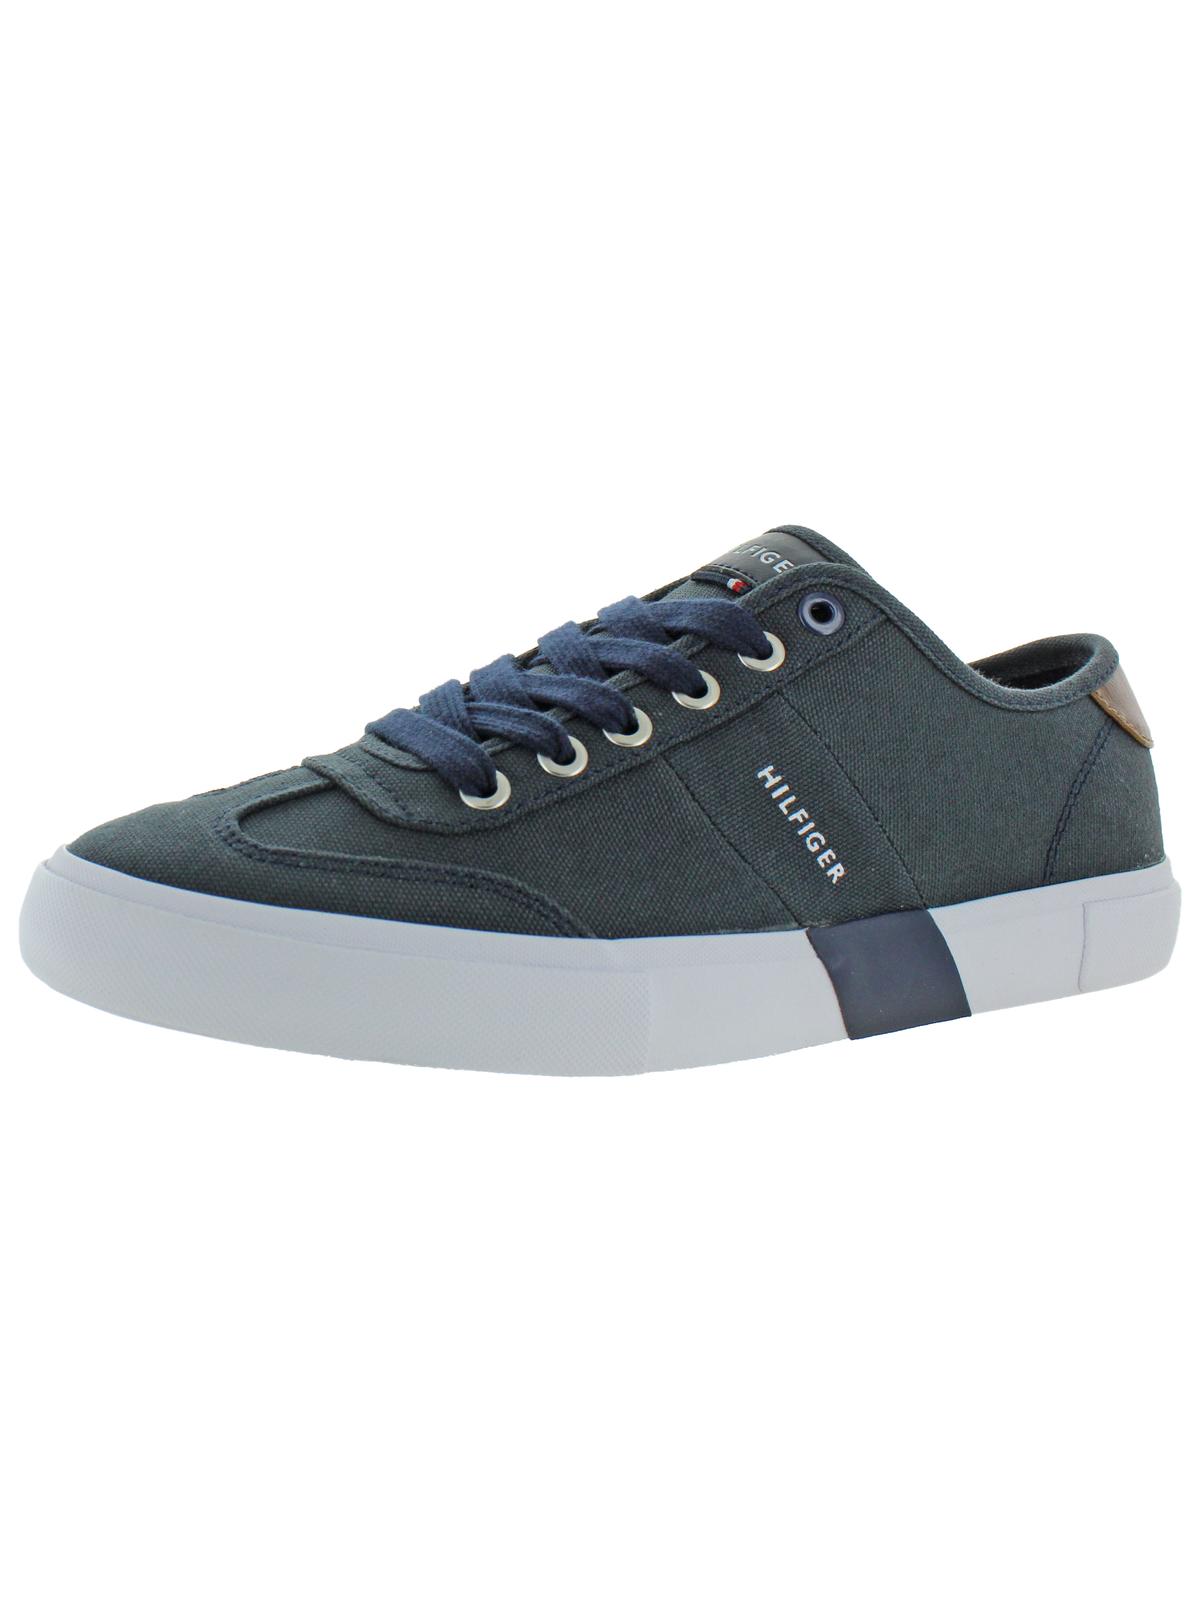 Tommy Hilfiger Mens Pandora Padded Insoles Fashion Sneakers Navy 11.5 Medium (D) - image 1 of 2